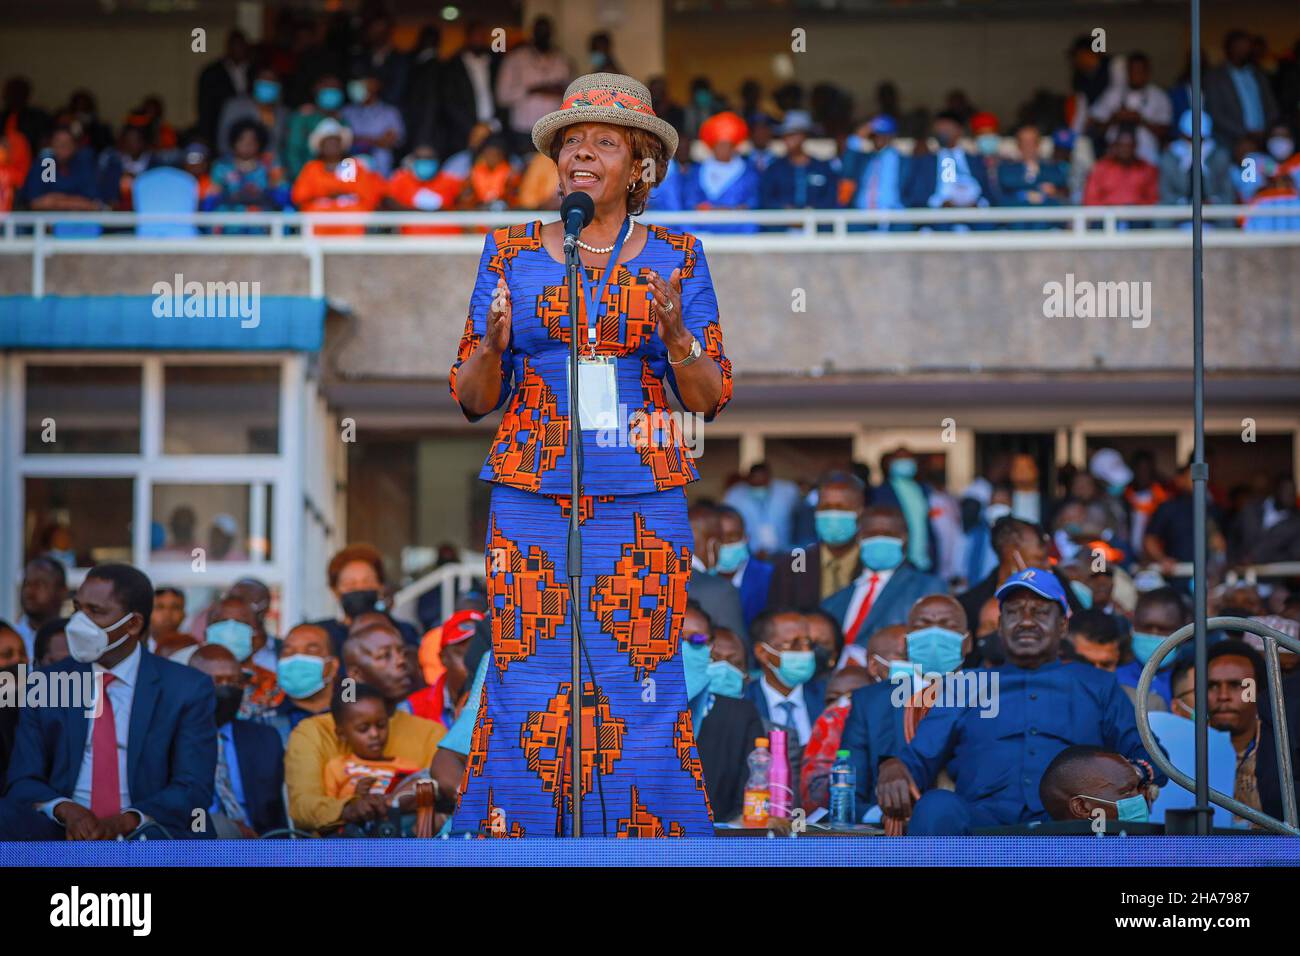 Charity ngilu High Resolution Stock Photography and Images - Alamy